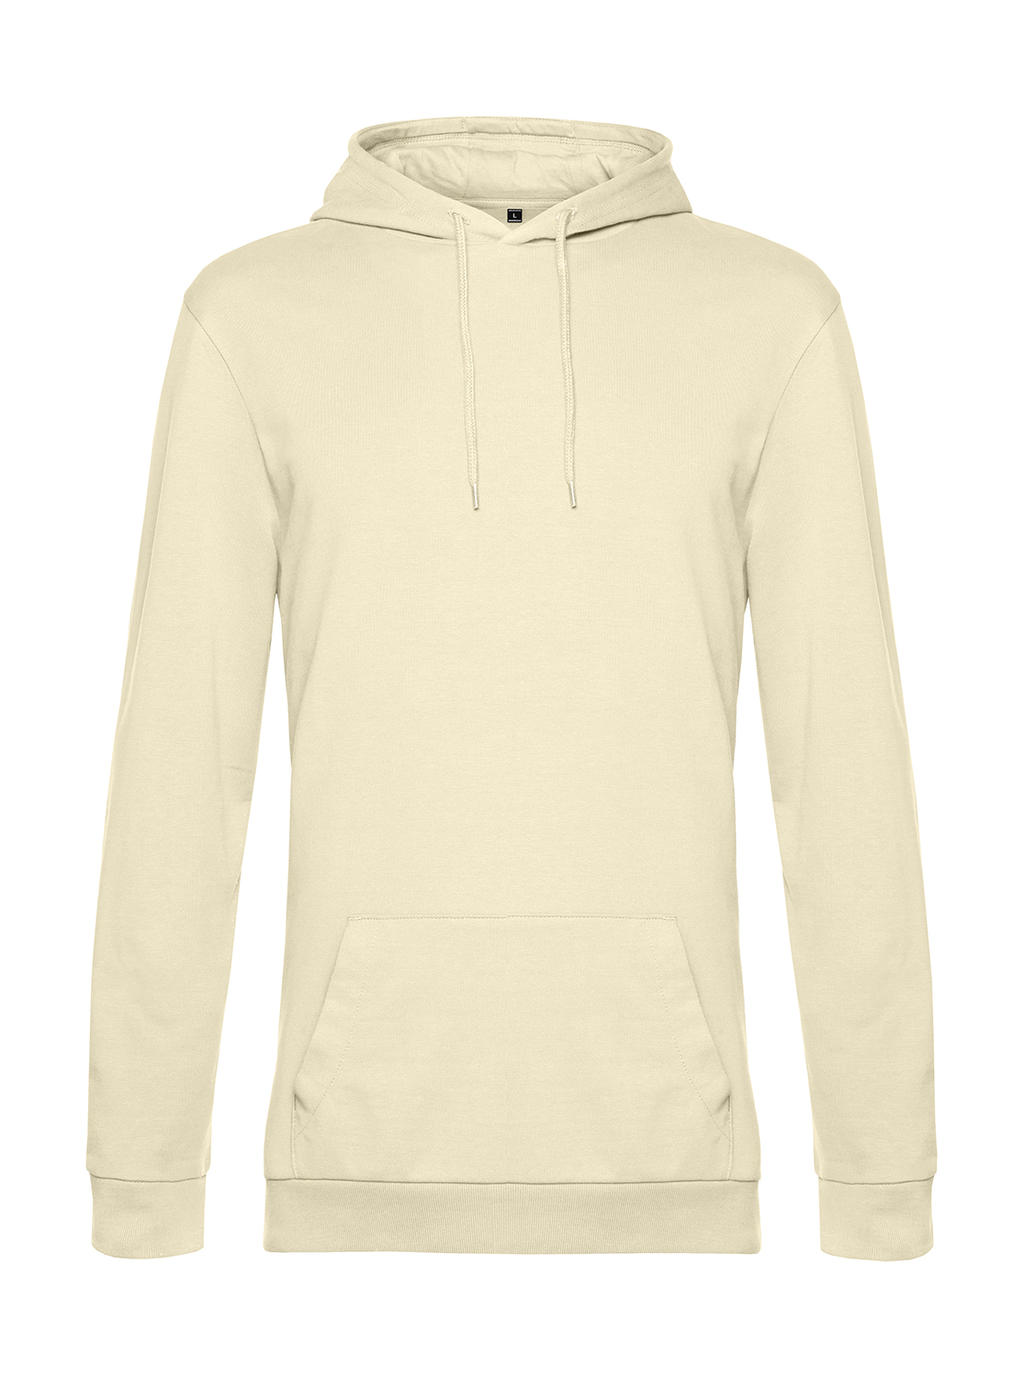 Mikina s kapucňou #Hoodie French Terry - pale yellow